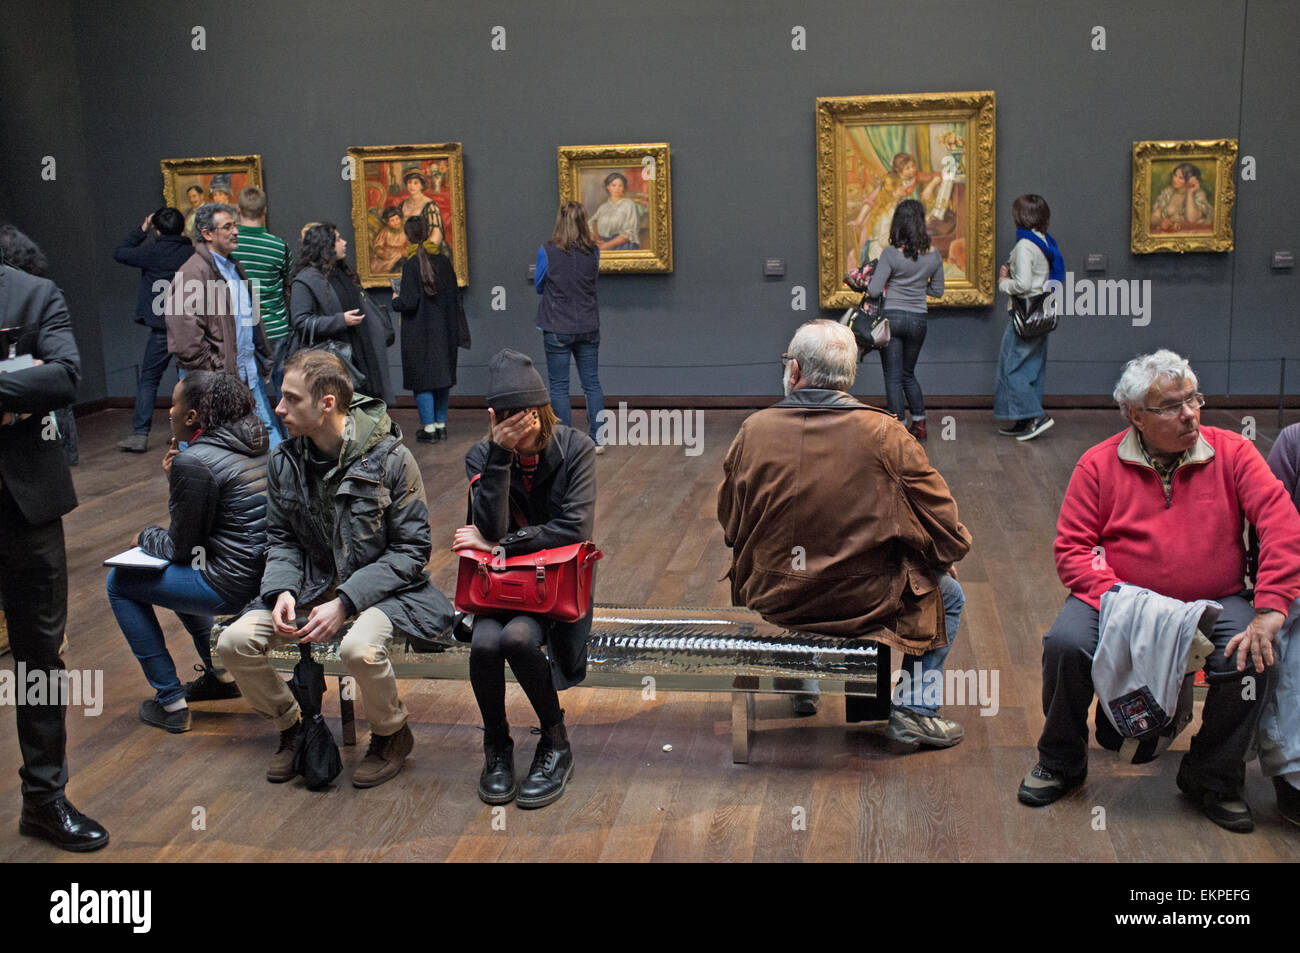 A sulking daughter hides from the camera at the musee d'orsay in Paris, France Stock Photo